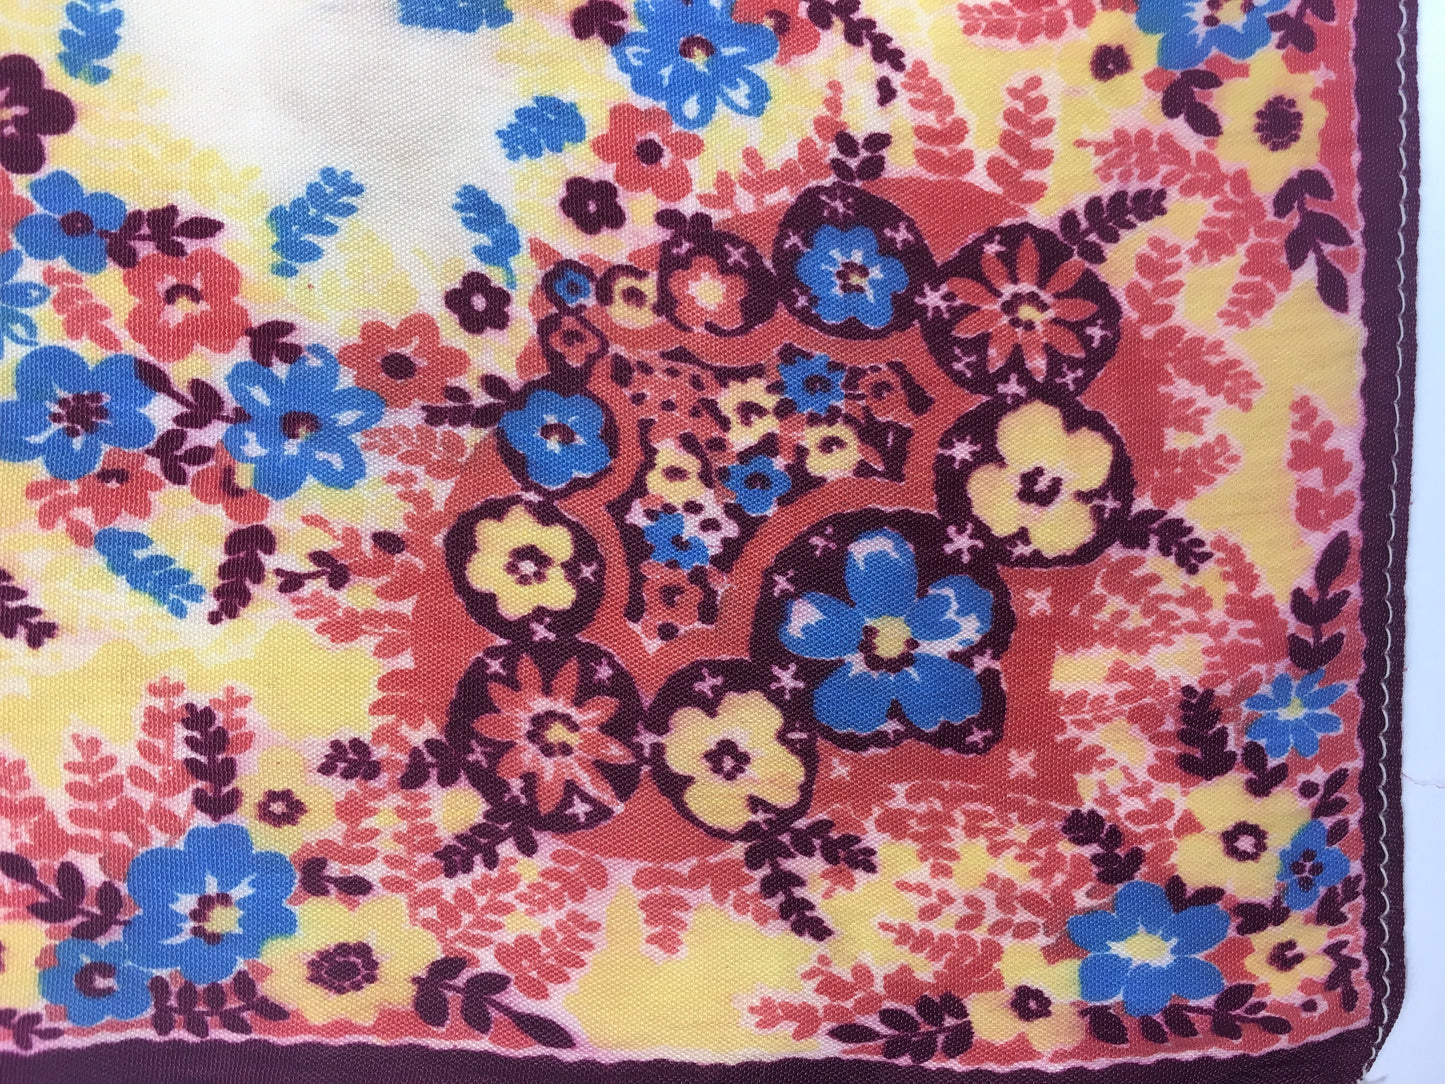 Original 1940’s / 1950’s Rayon Hankie -  In A Lovely Floral In Burgundy, Oranges, Blues and Yellows